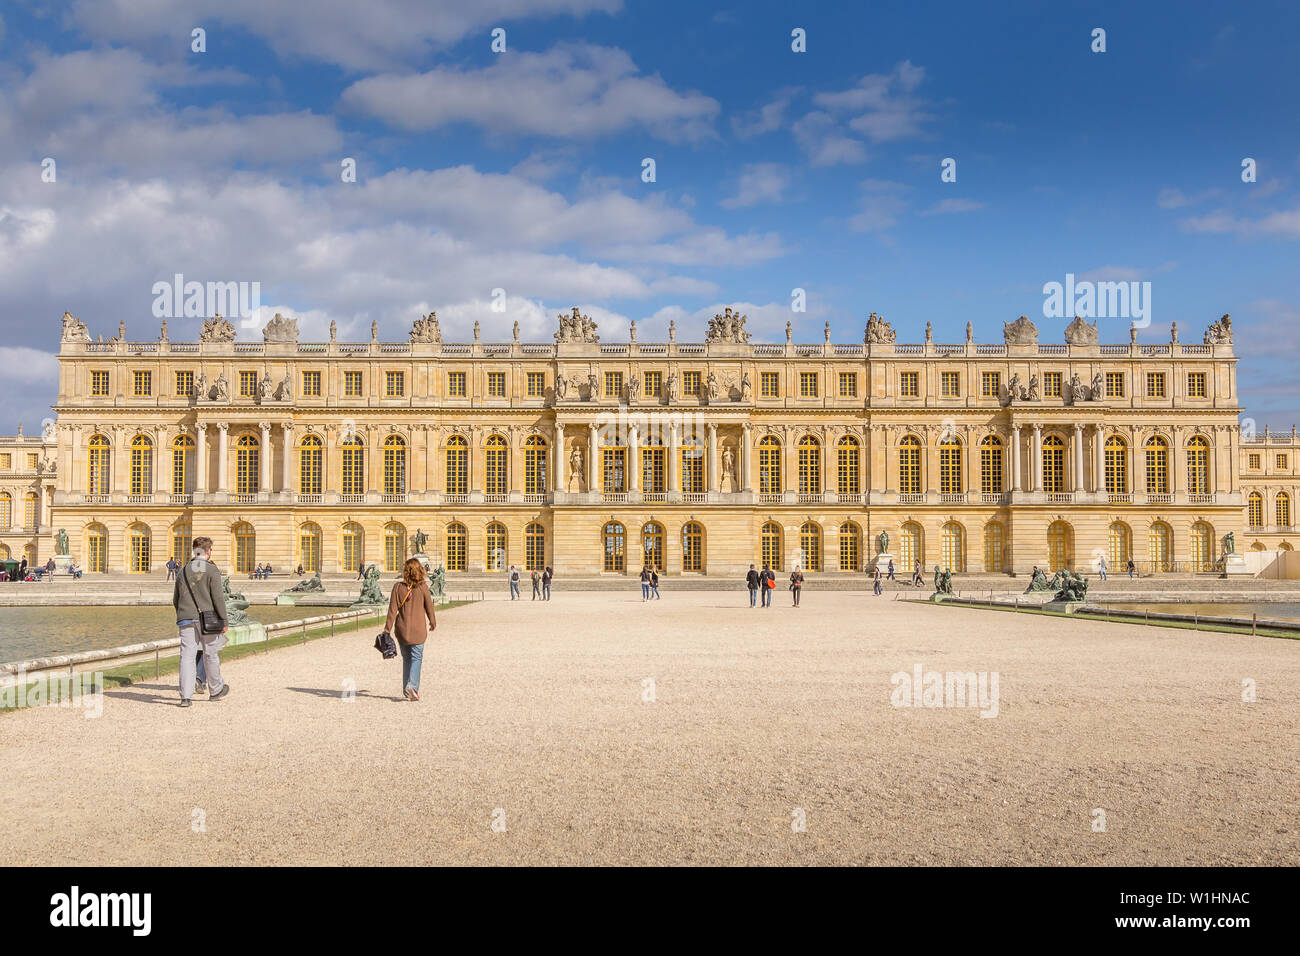 Versailles, France. April 18, 2014: facade of the Palace of Versailles, France Stock Photo